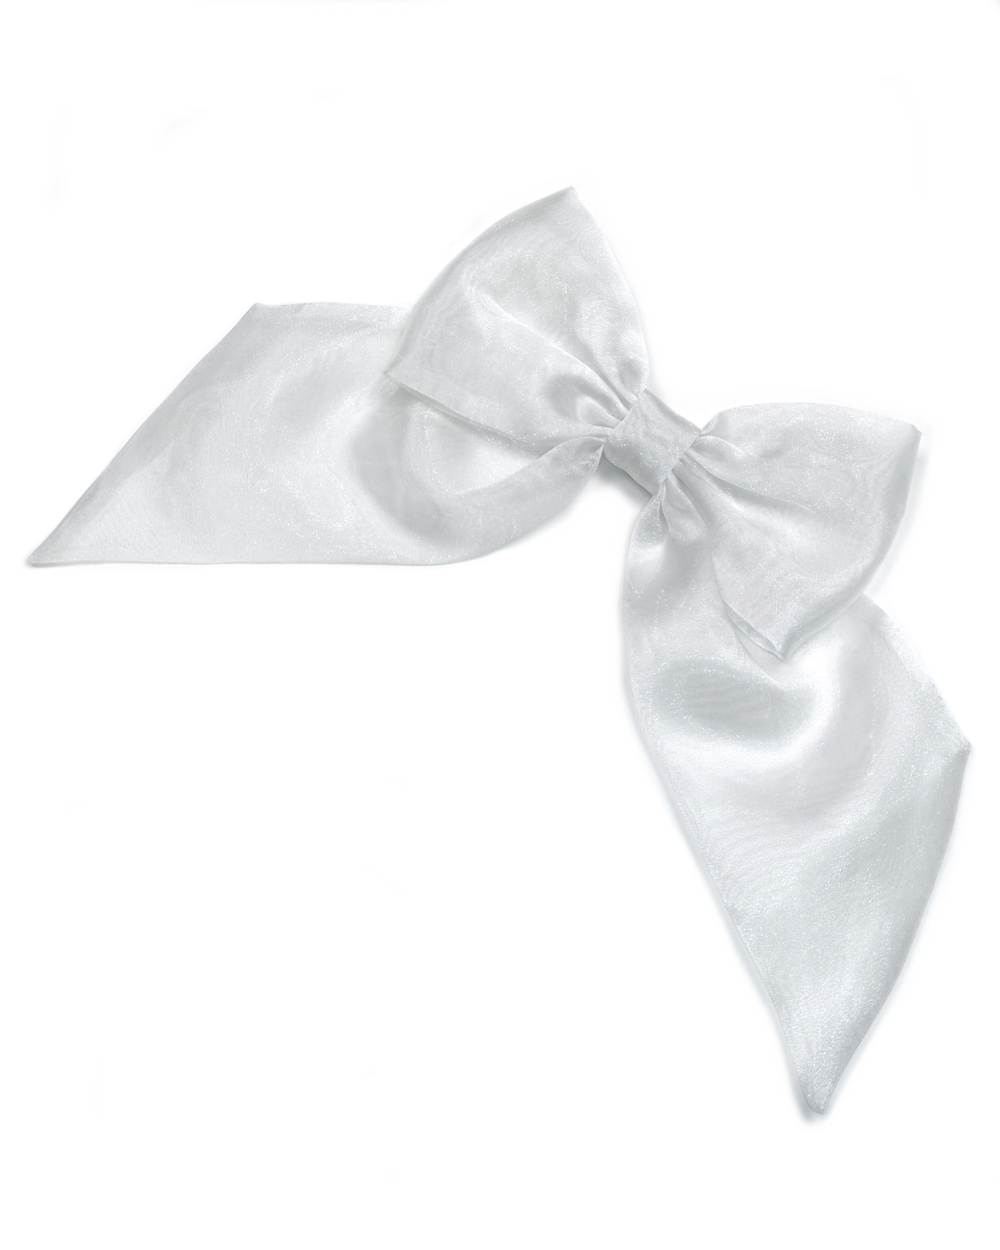 White brooch in the shape of a giant bow made of organza by melikestea.